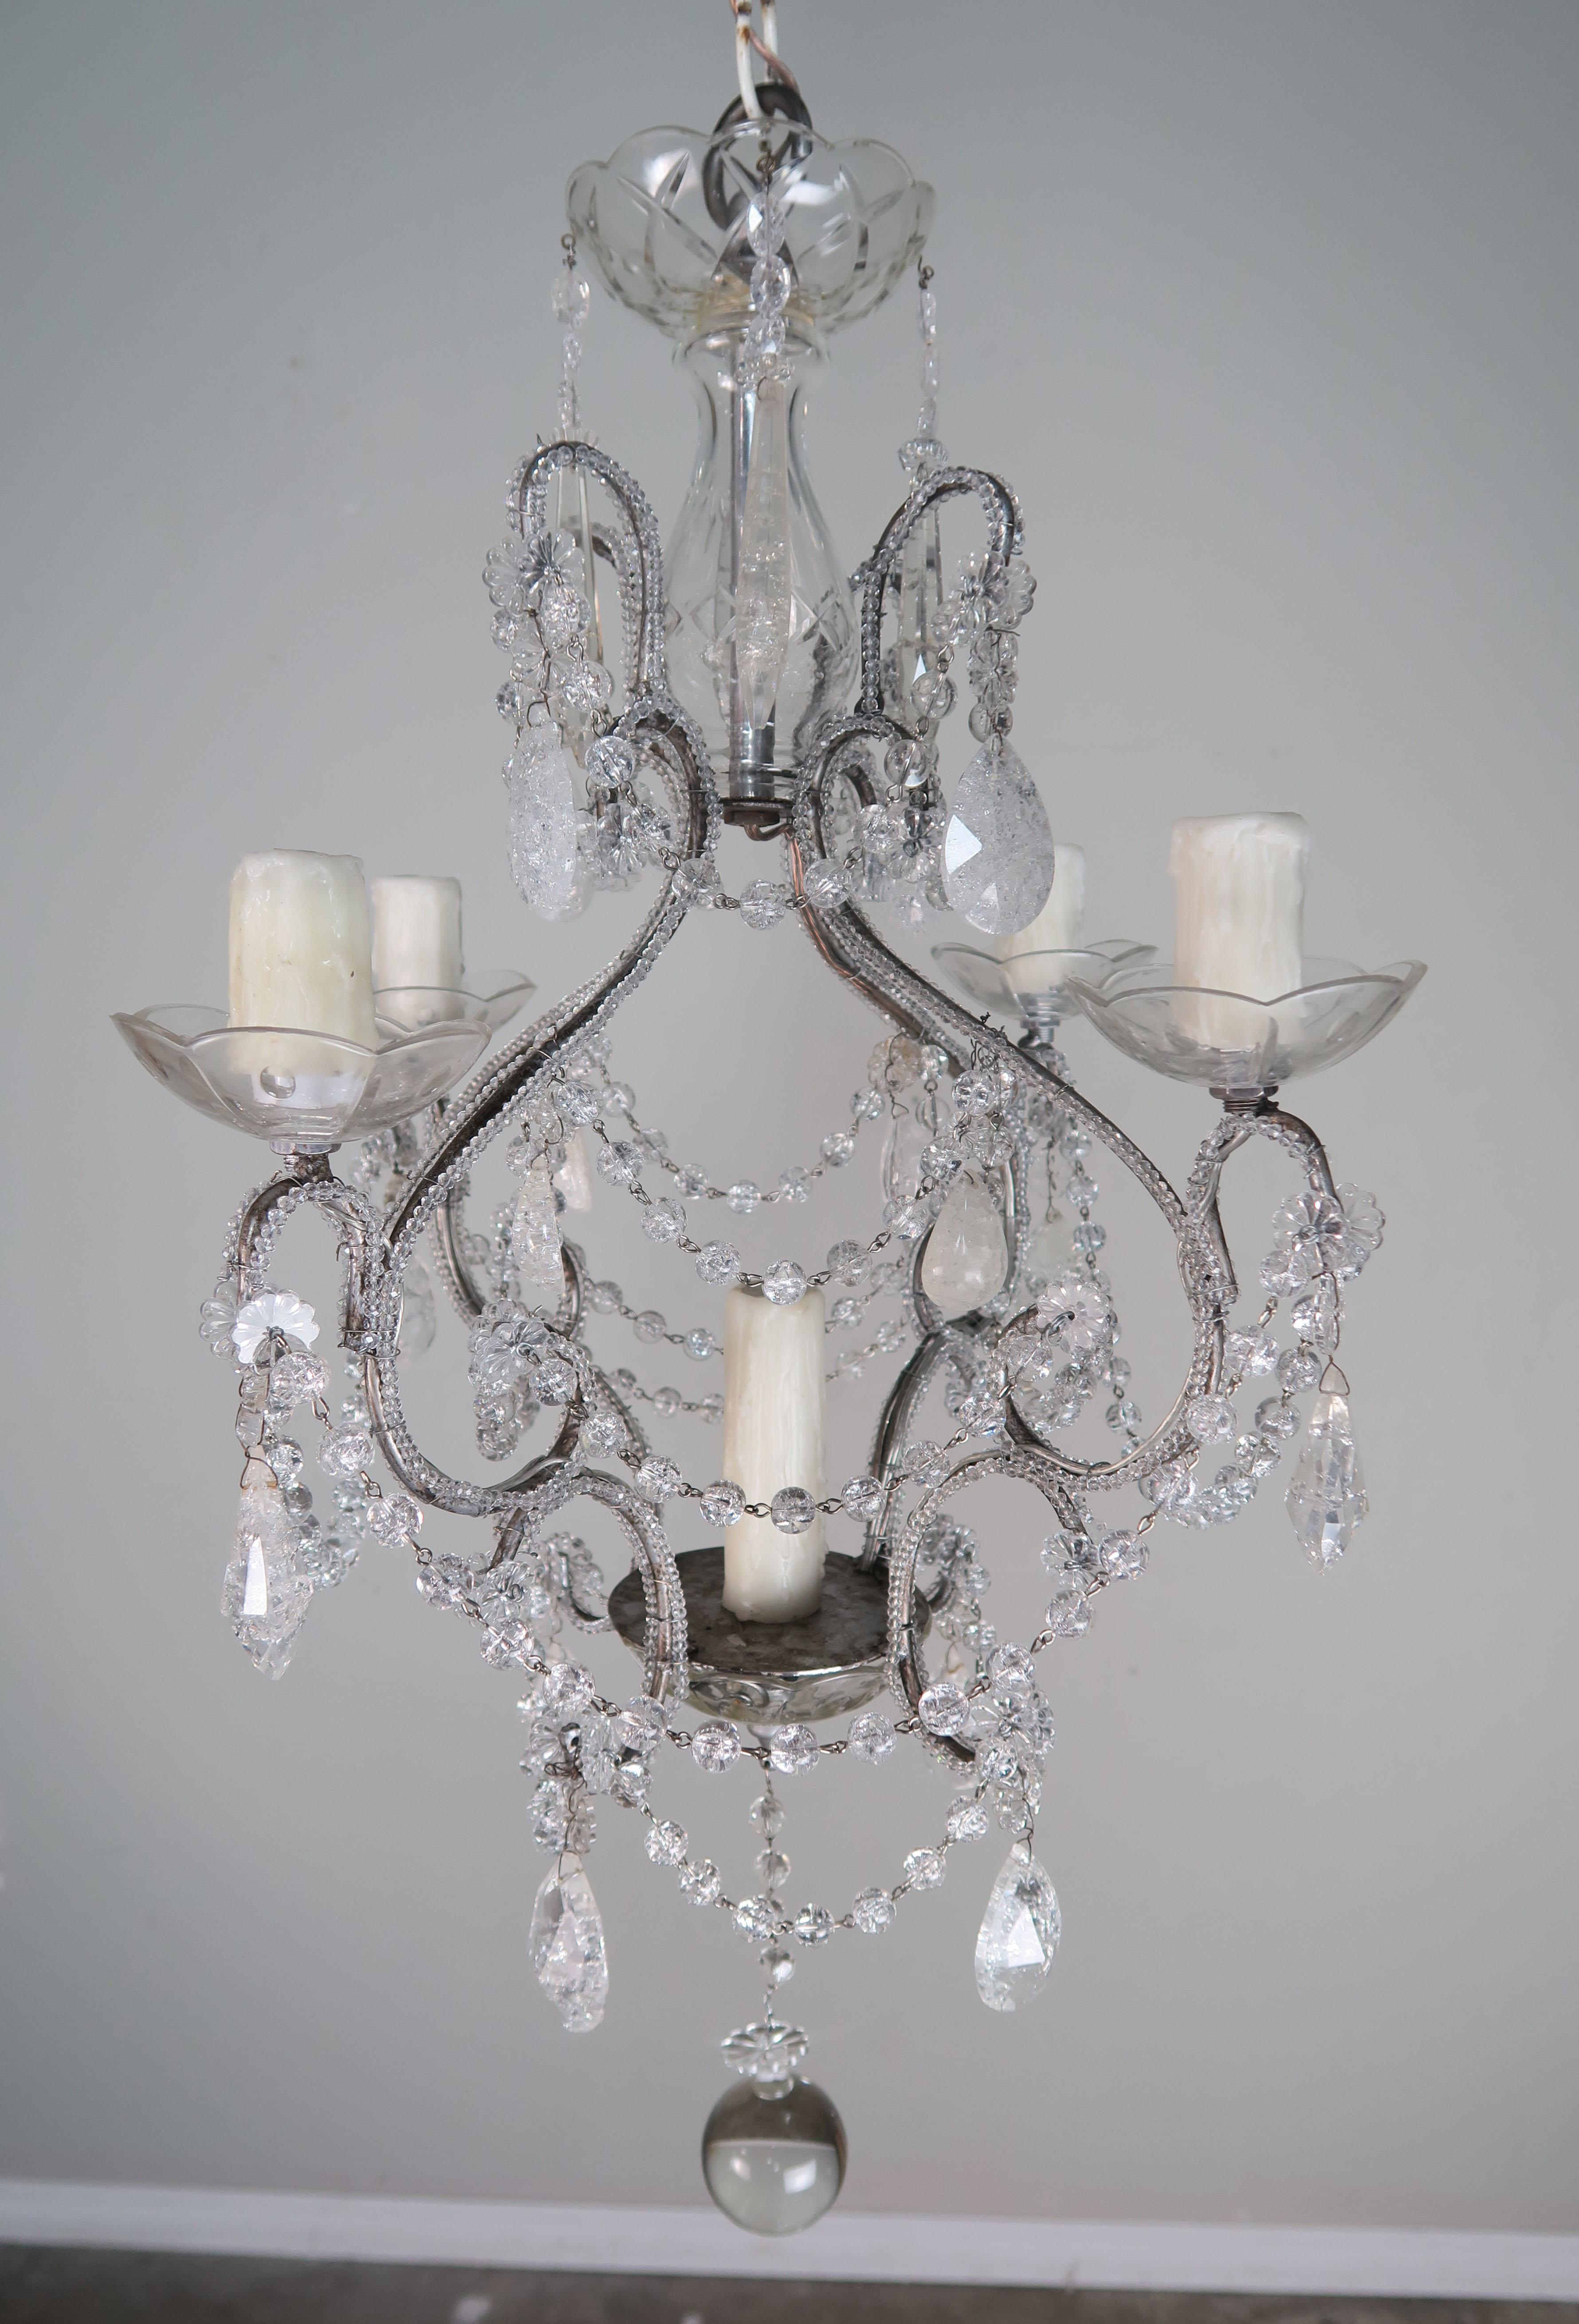 Five-light French rock crystal beaded chandelier that has been newly rewired with drip wax candle covers. Includes chain and canopy.